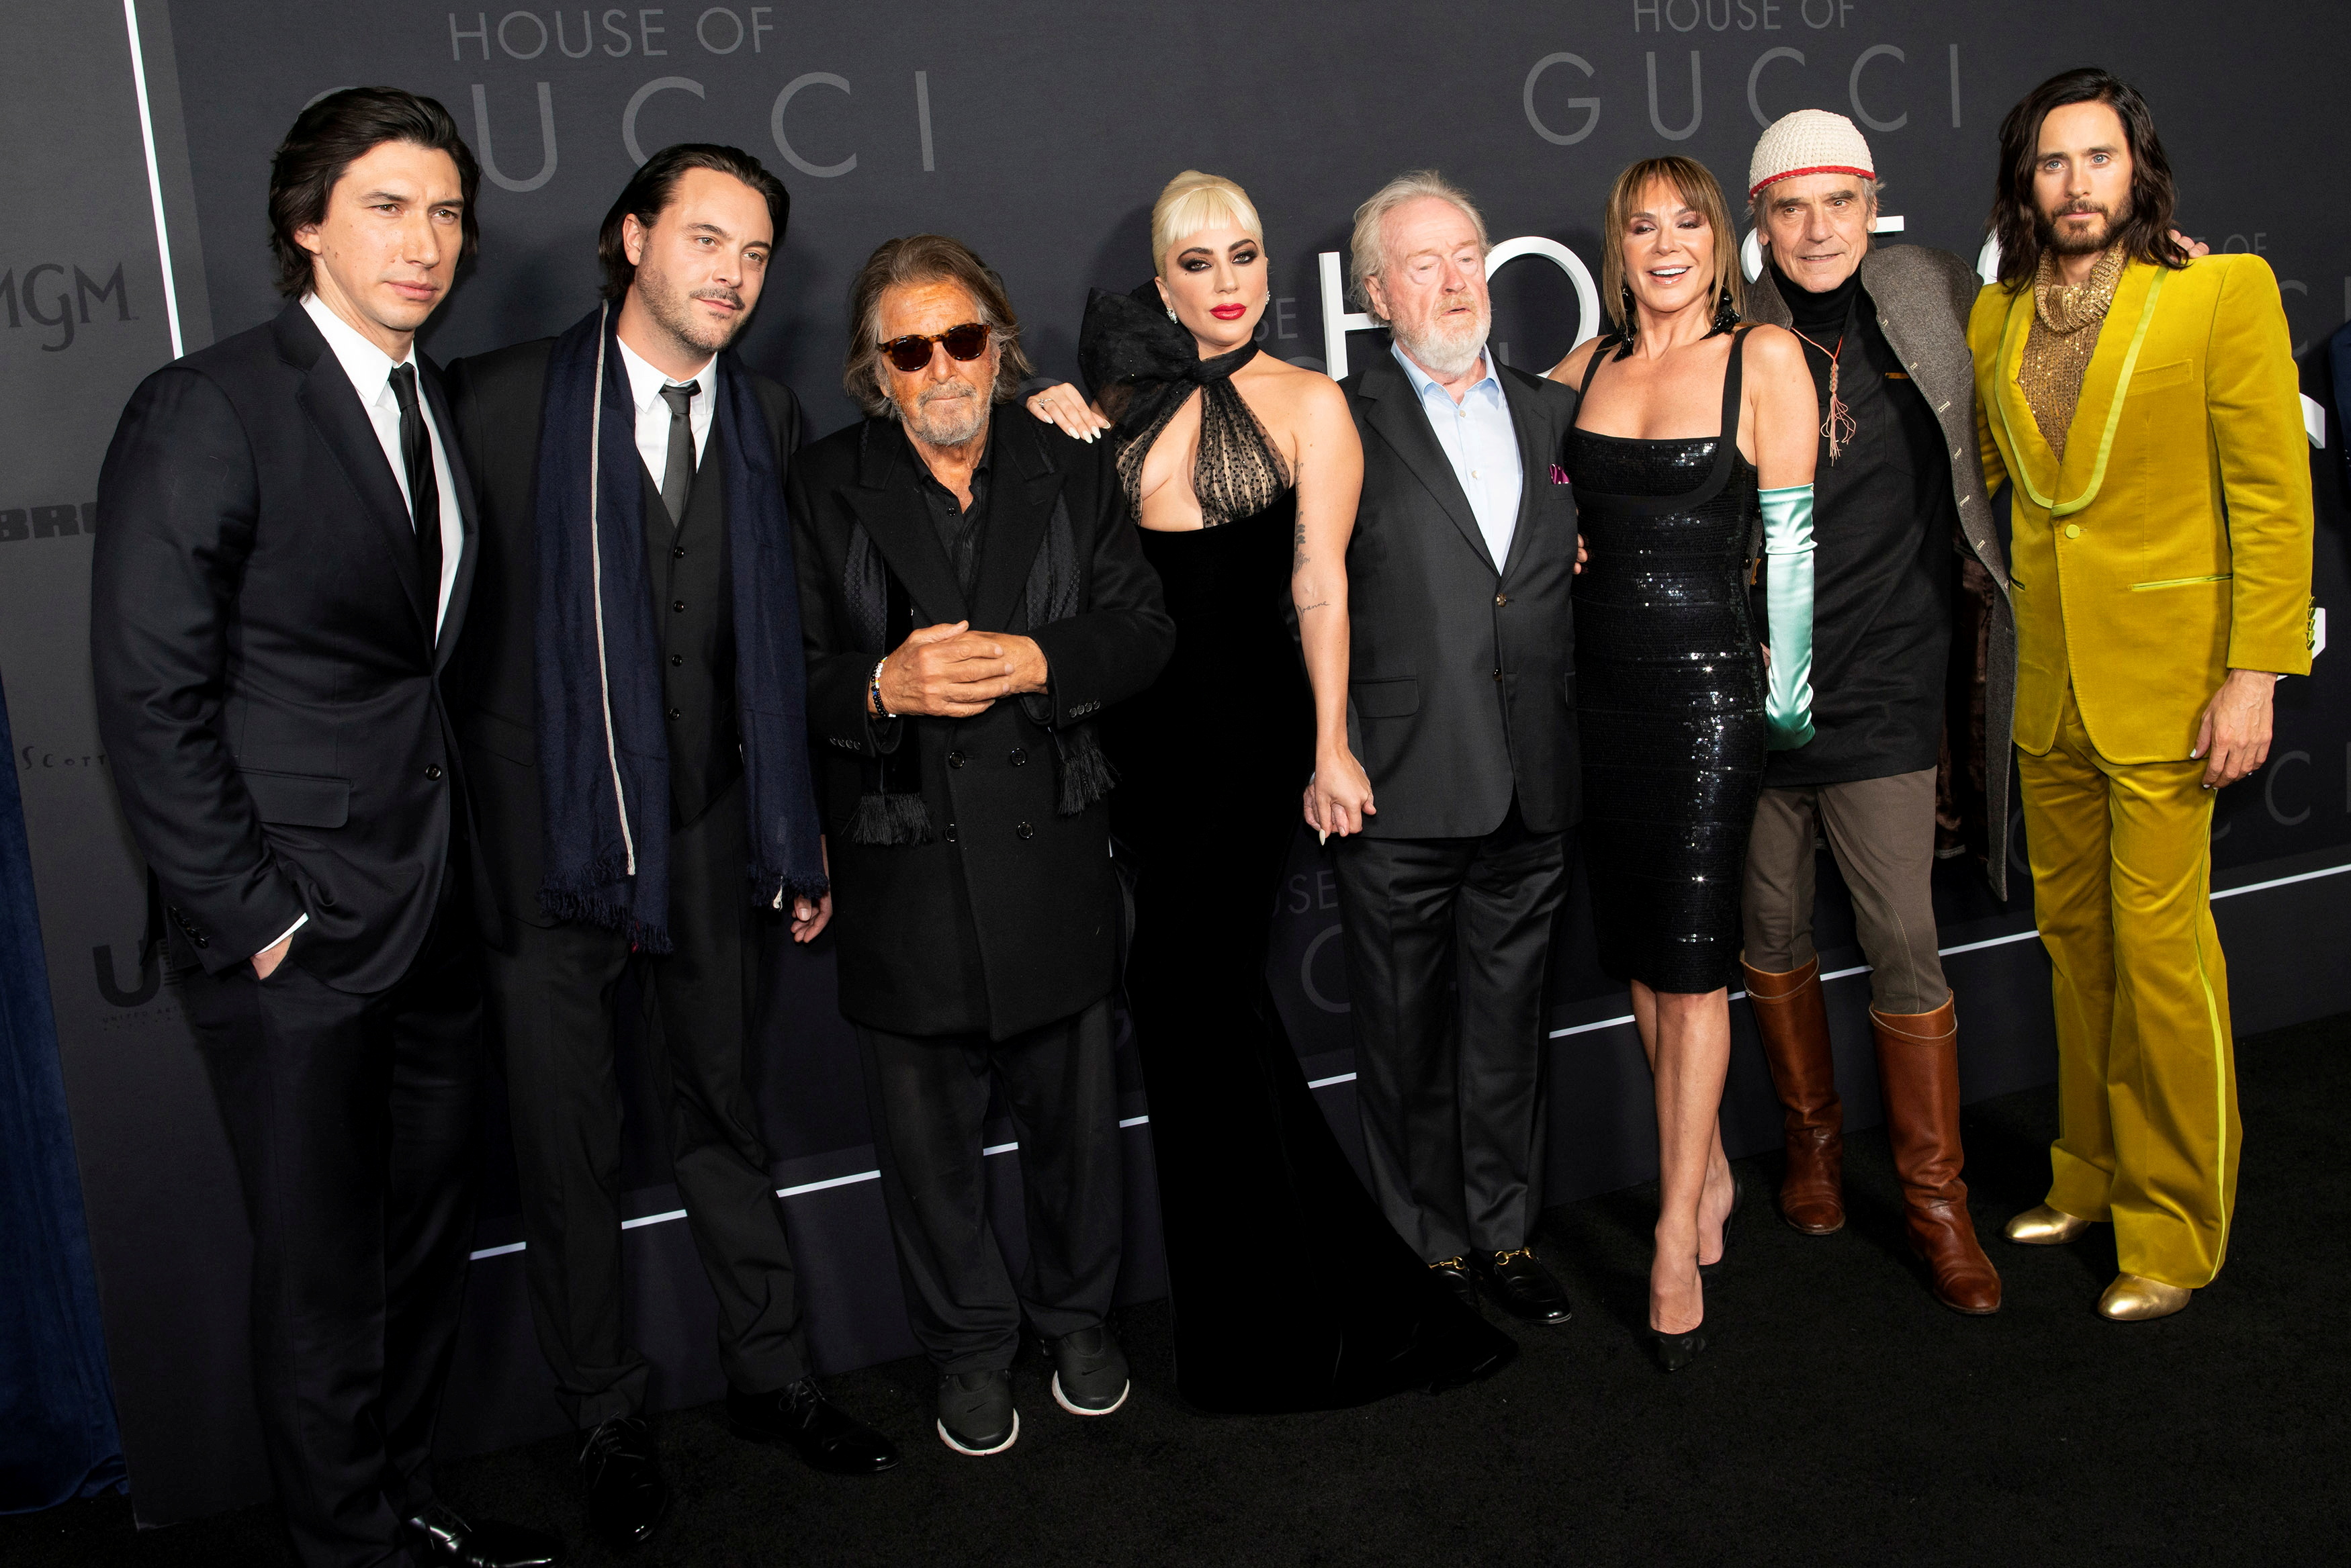 Cast members attend the Premiere of the film 'House of Gucci' at Jazz at Lincoln Center in New York City, New York